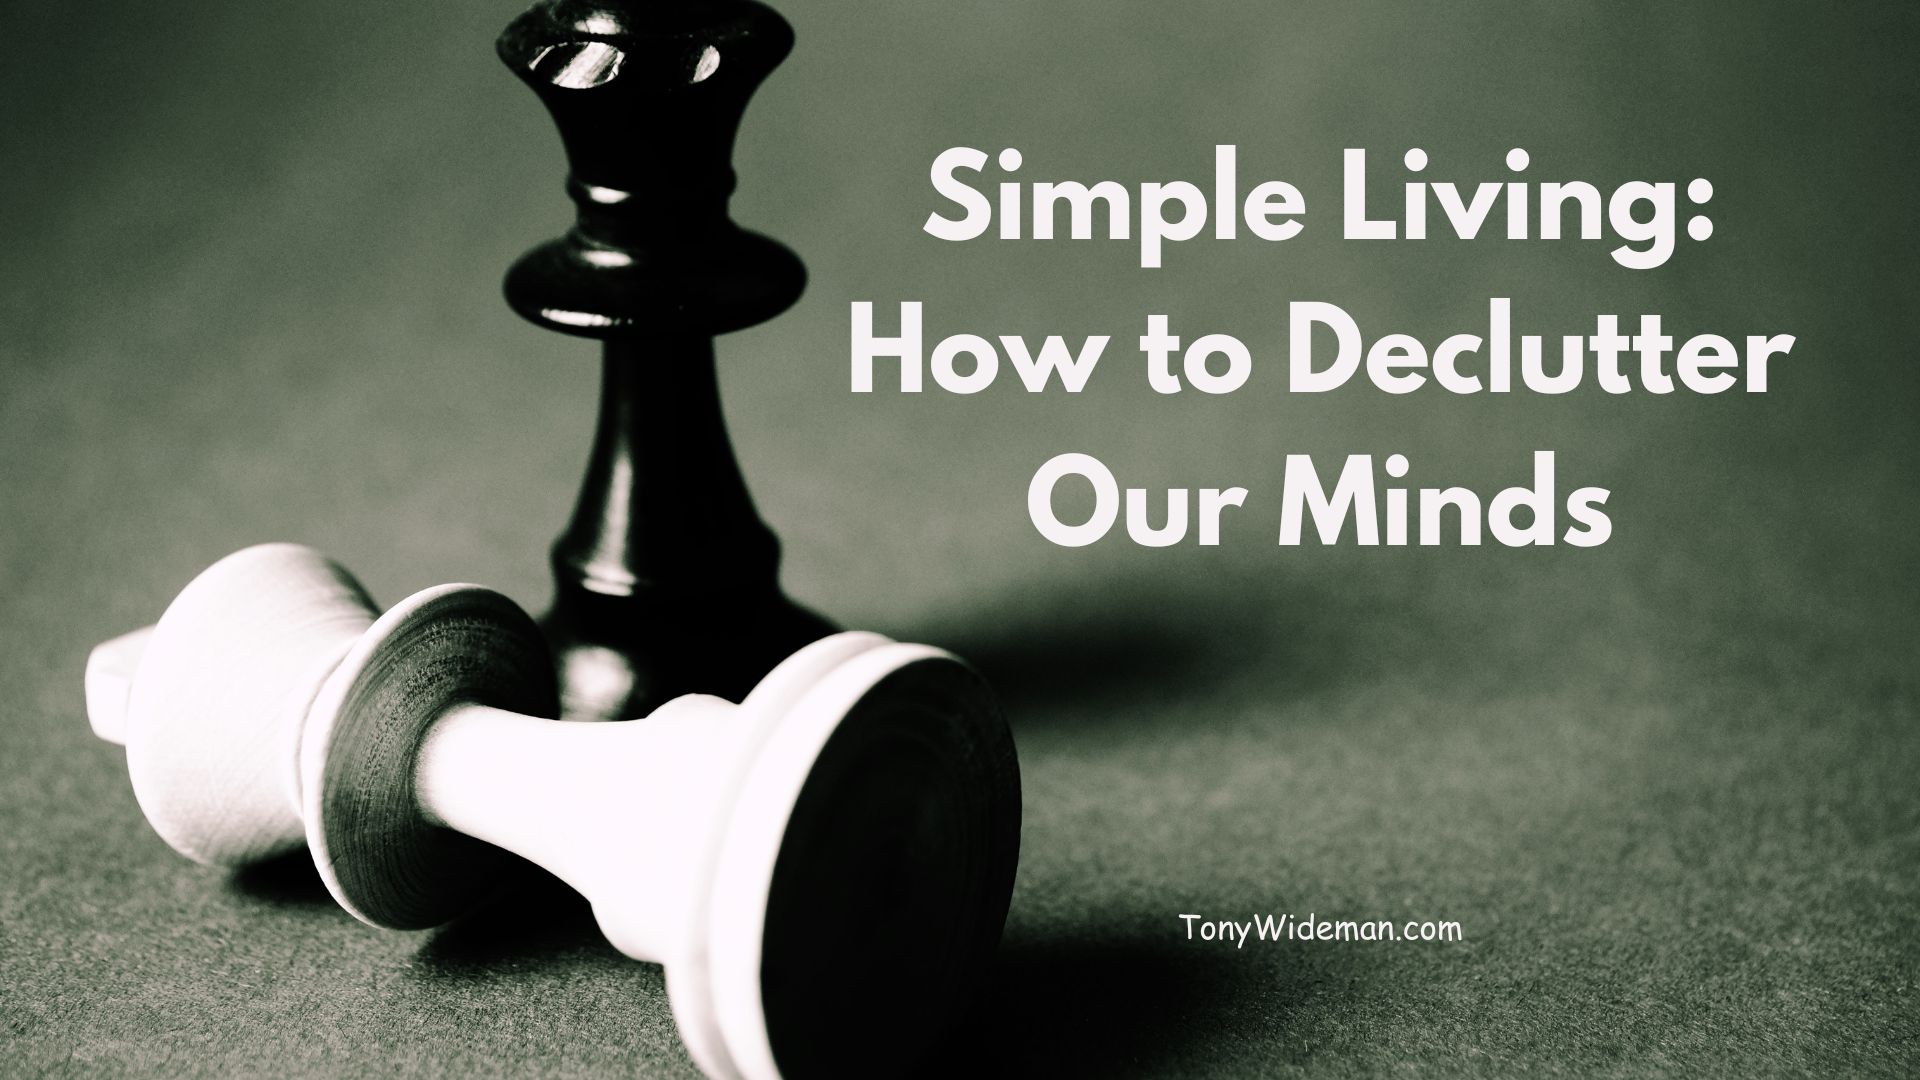 Simple Living: How to Declutter Our Minds